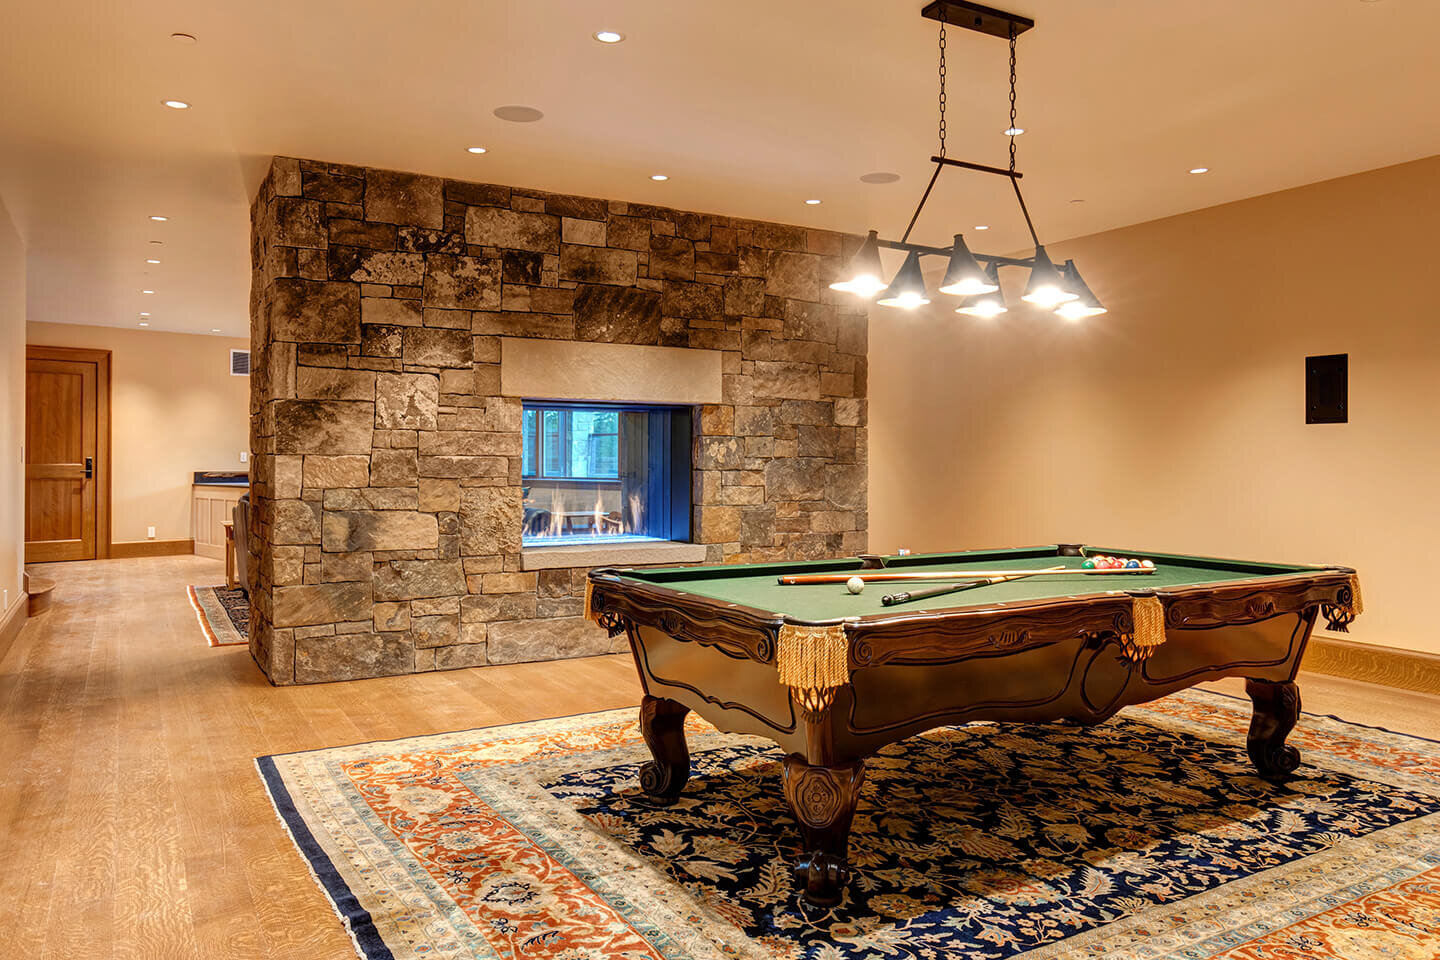 Billiards room with center stone fireplace